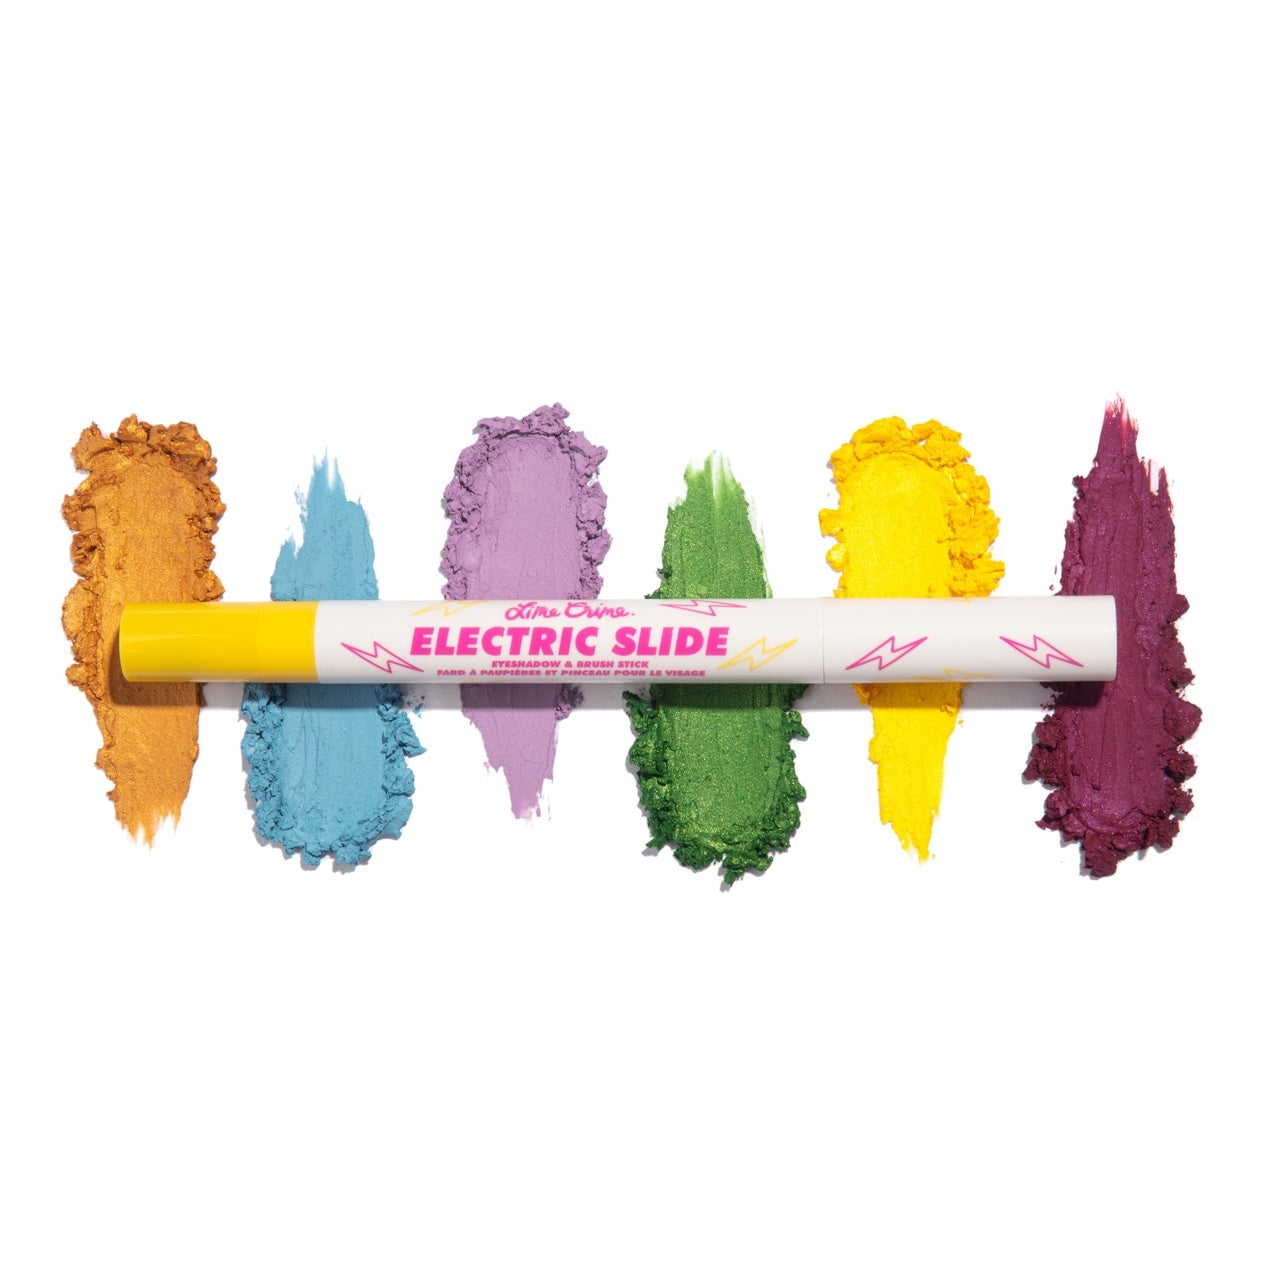 Have You Tried Our New Electric Slide Eyeshadow Sticks?